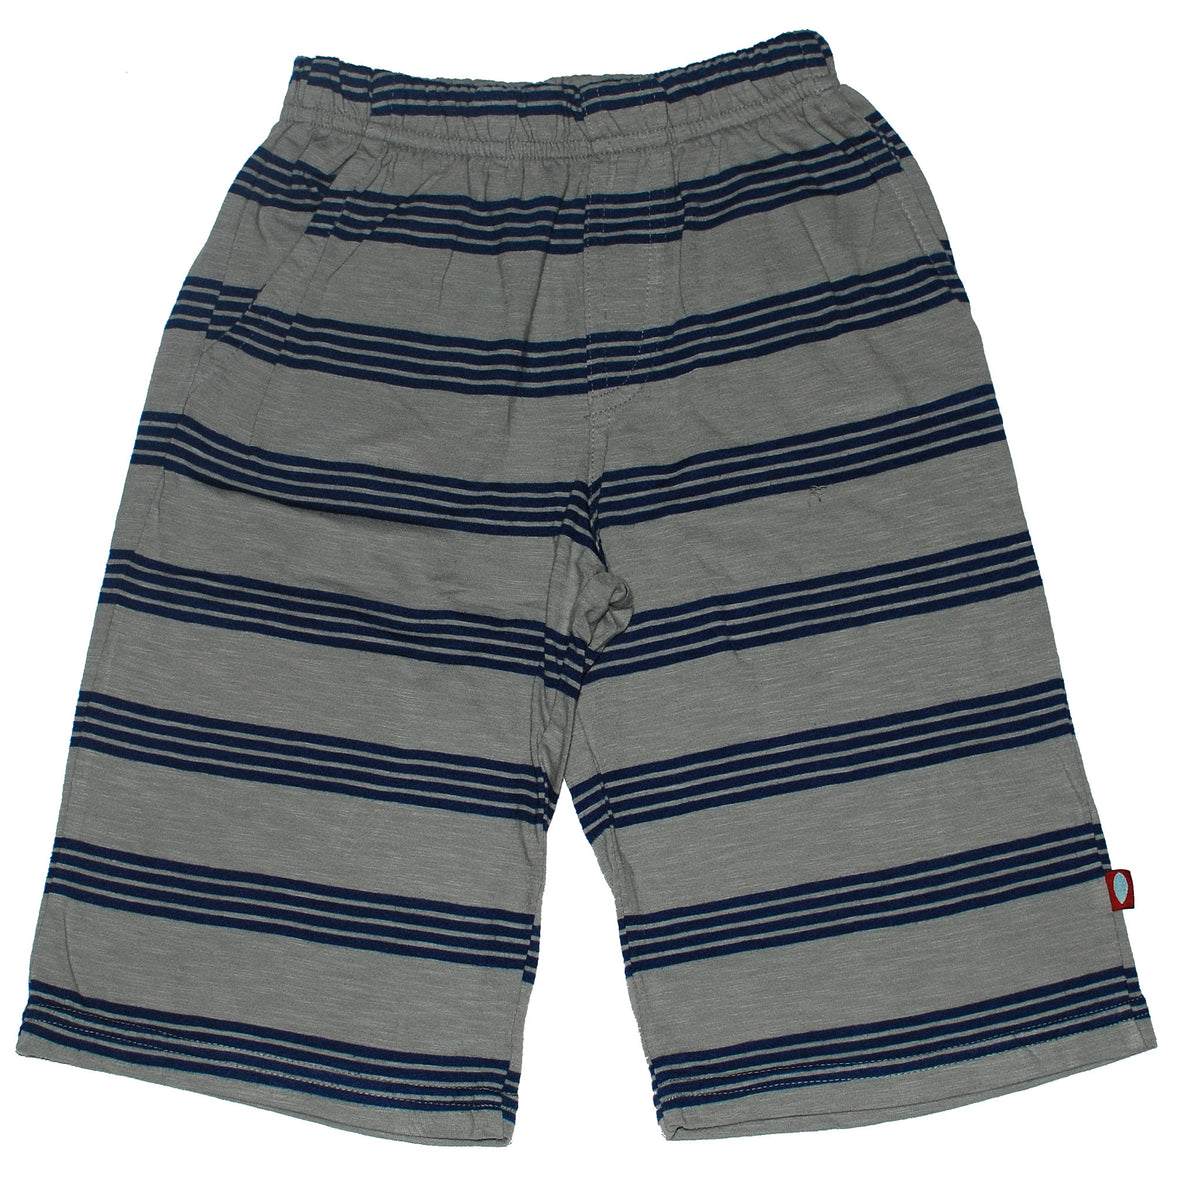 City Threads Boys' 3-Pocket Soft Jersey Shorts 100% Cotton Made in USA